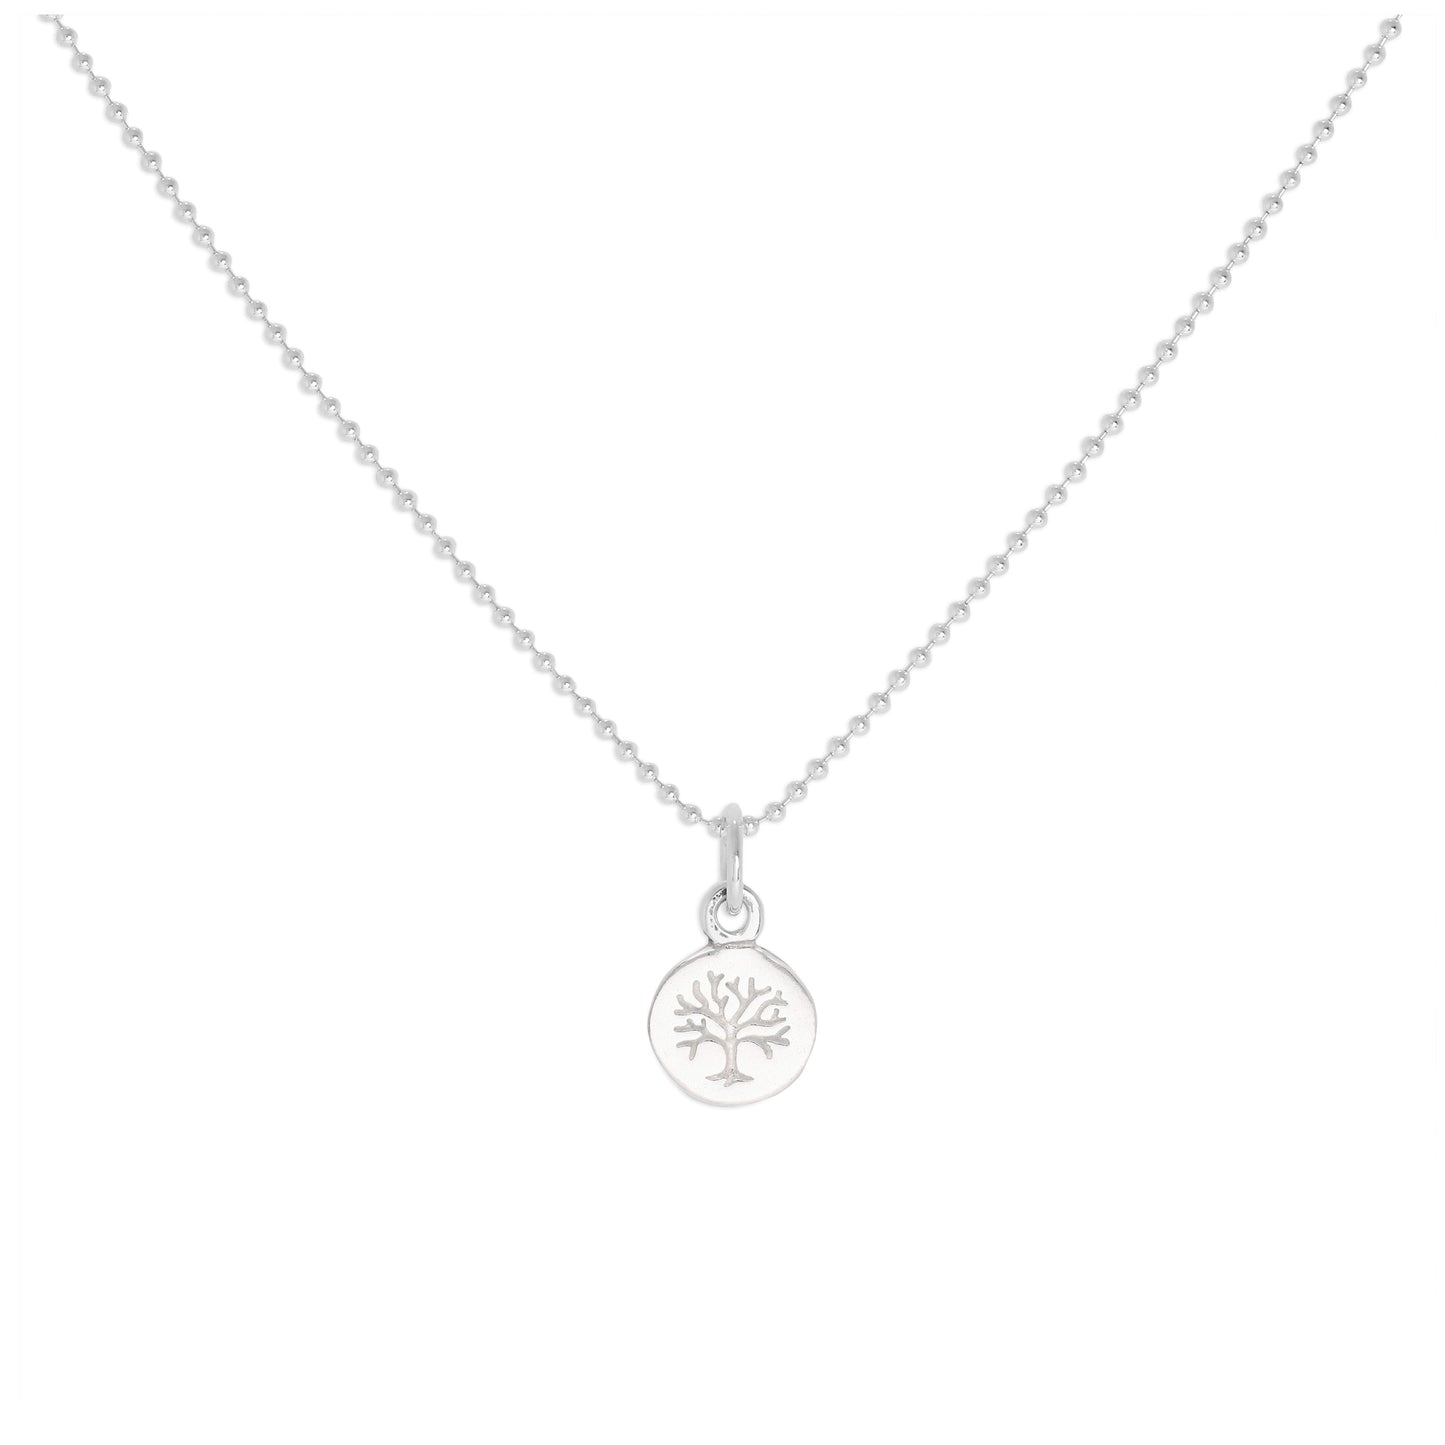 Tiny Sterling Silver Tree of Life Pendant Necklace 14 - 22 Inches